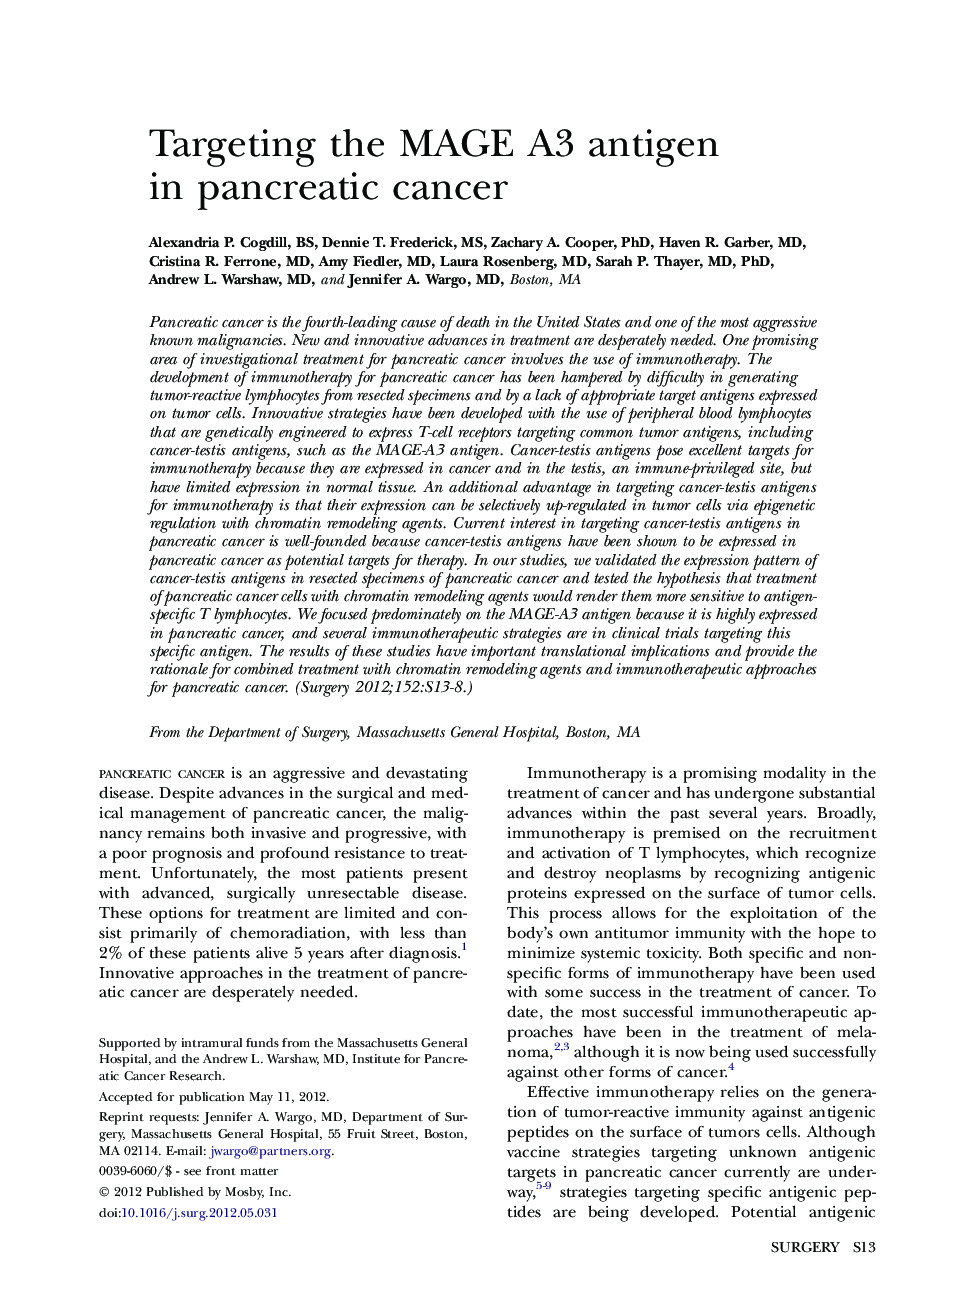 Targeting the MAGE A3 antigen in pancreatic cancer 